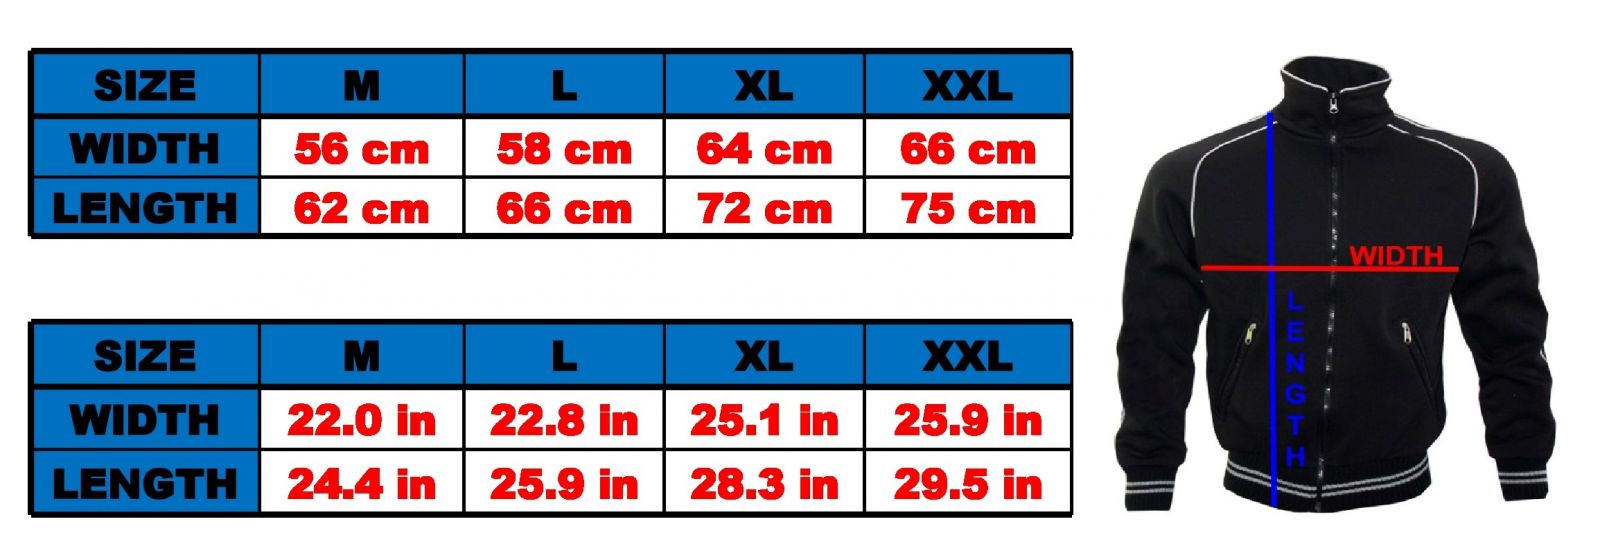 eu sizes in inches